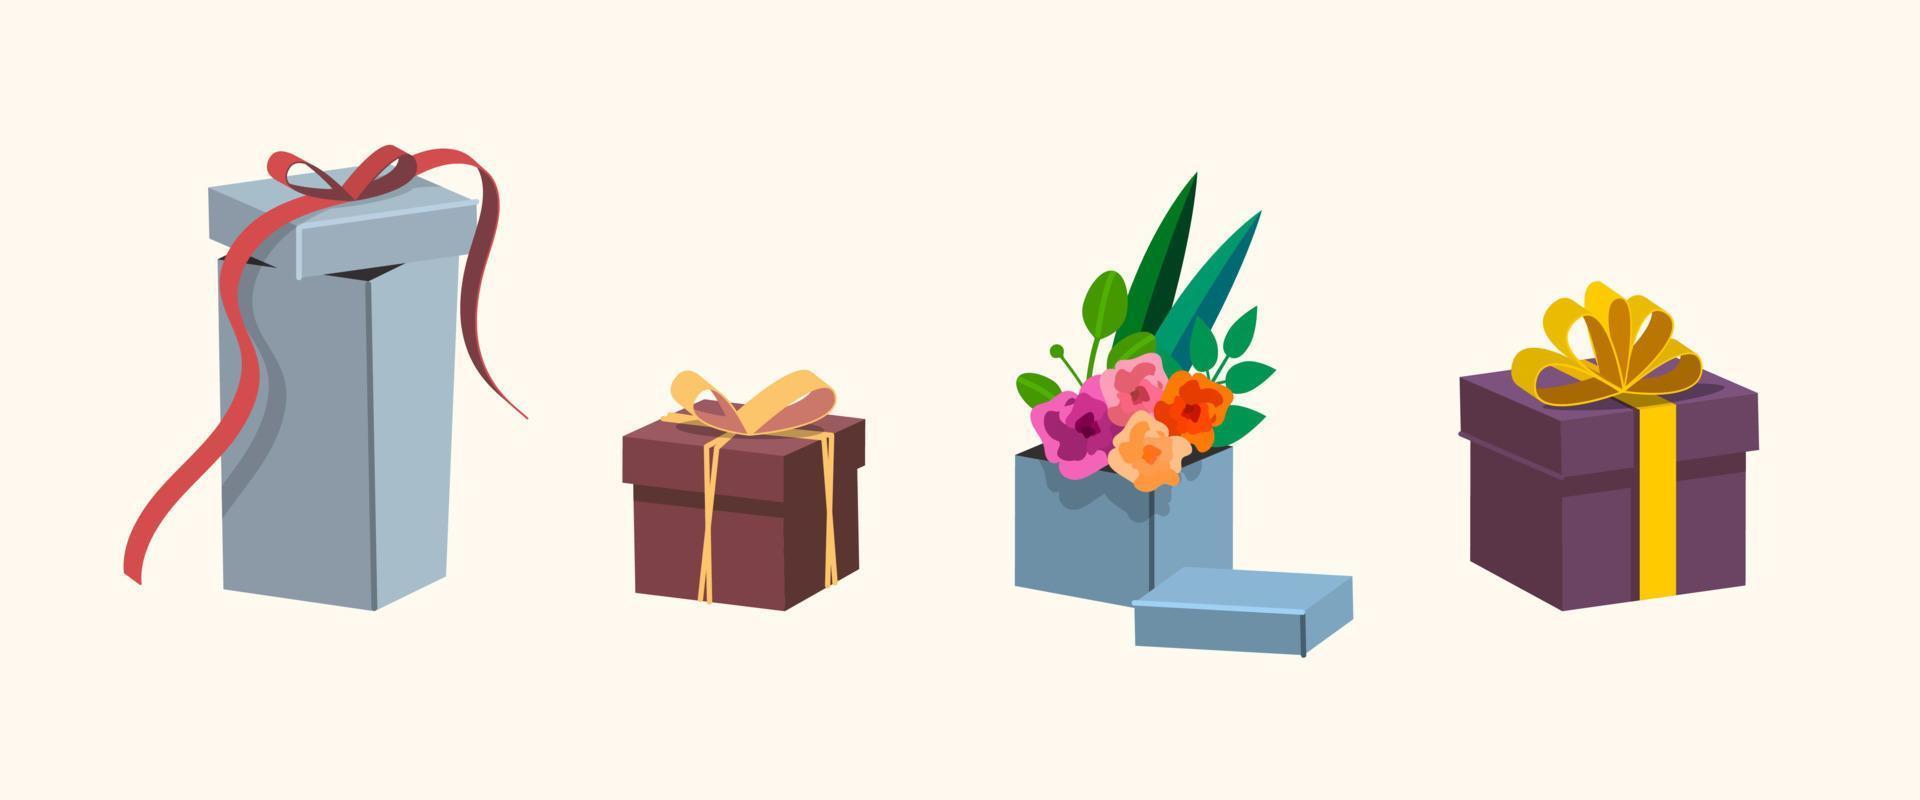 Set of colorful gift box with ribbons and flowers. Vector illustration in trend flat style. All objects are isolated